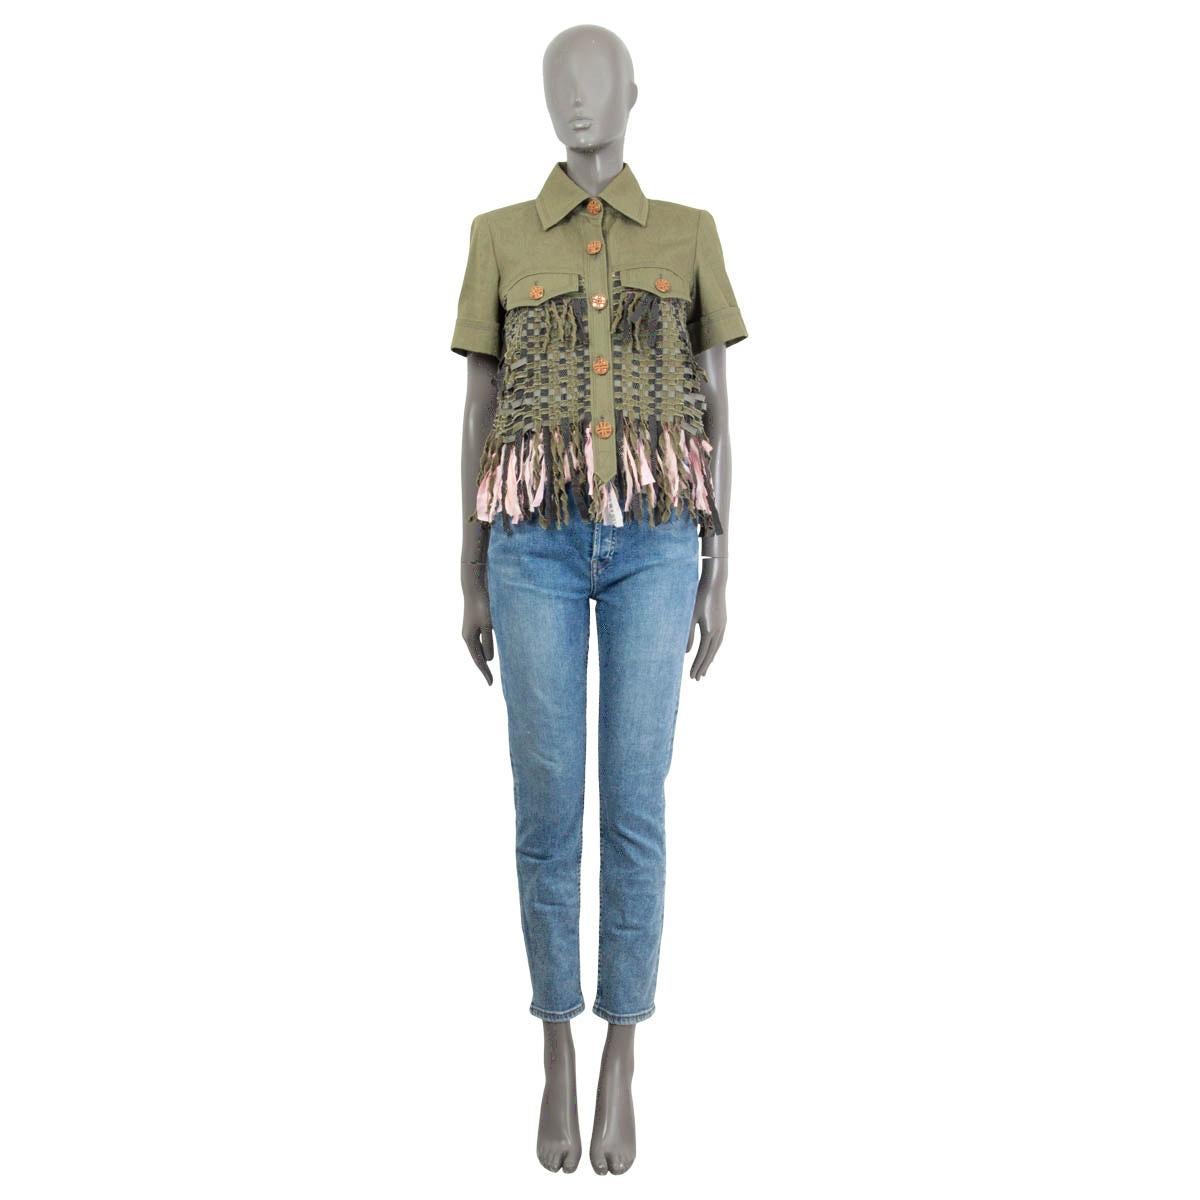 100% authentic Chanel 2017 Cuba Fringed Short Sleeve Jacket in olive green cotton (100%) with weaved khaki and sage green torso part. Embellished with rose pink silk (100%) fringes at the bottom. Jacket has two flap pockets on the chest and padded